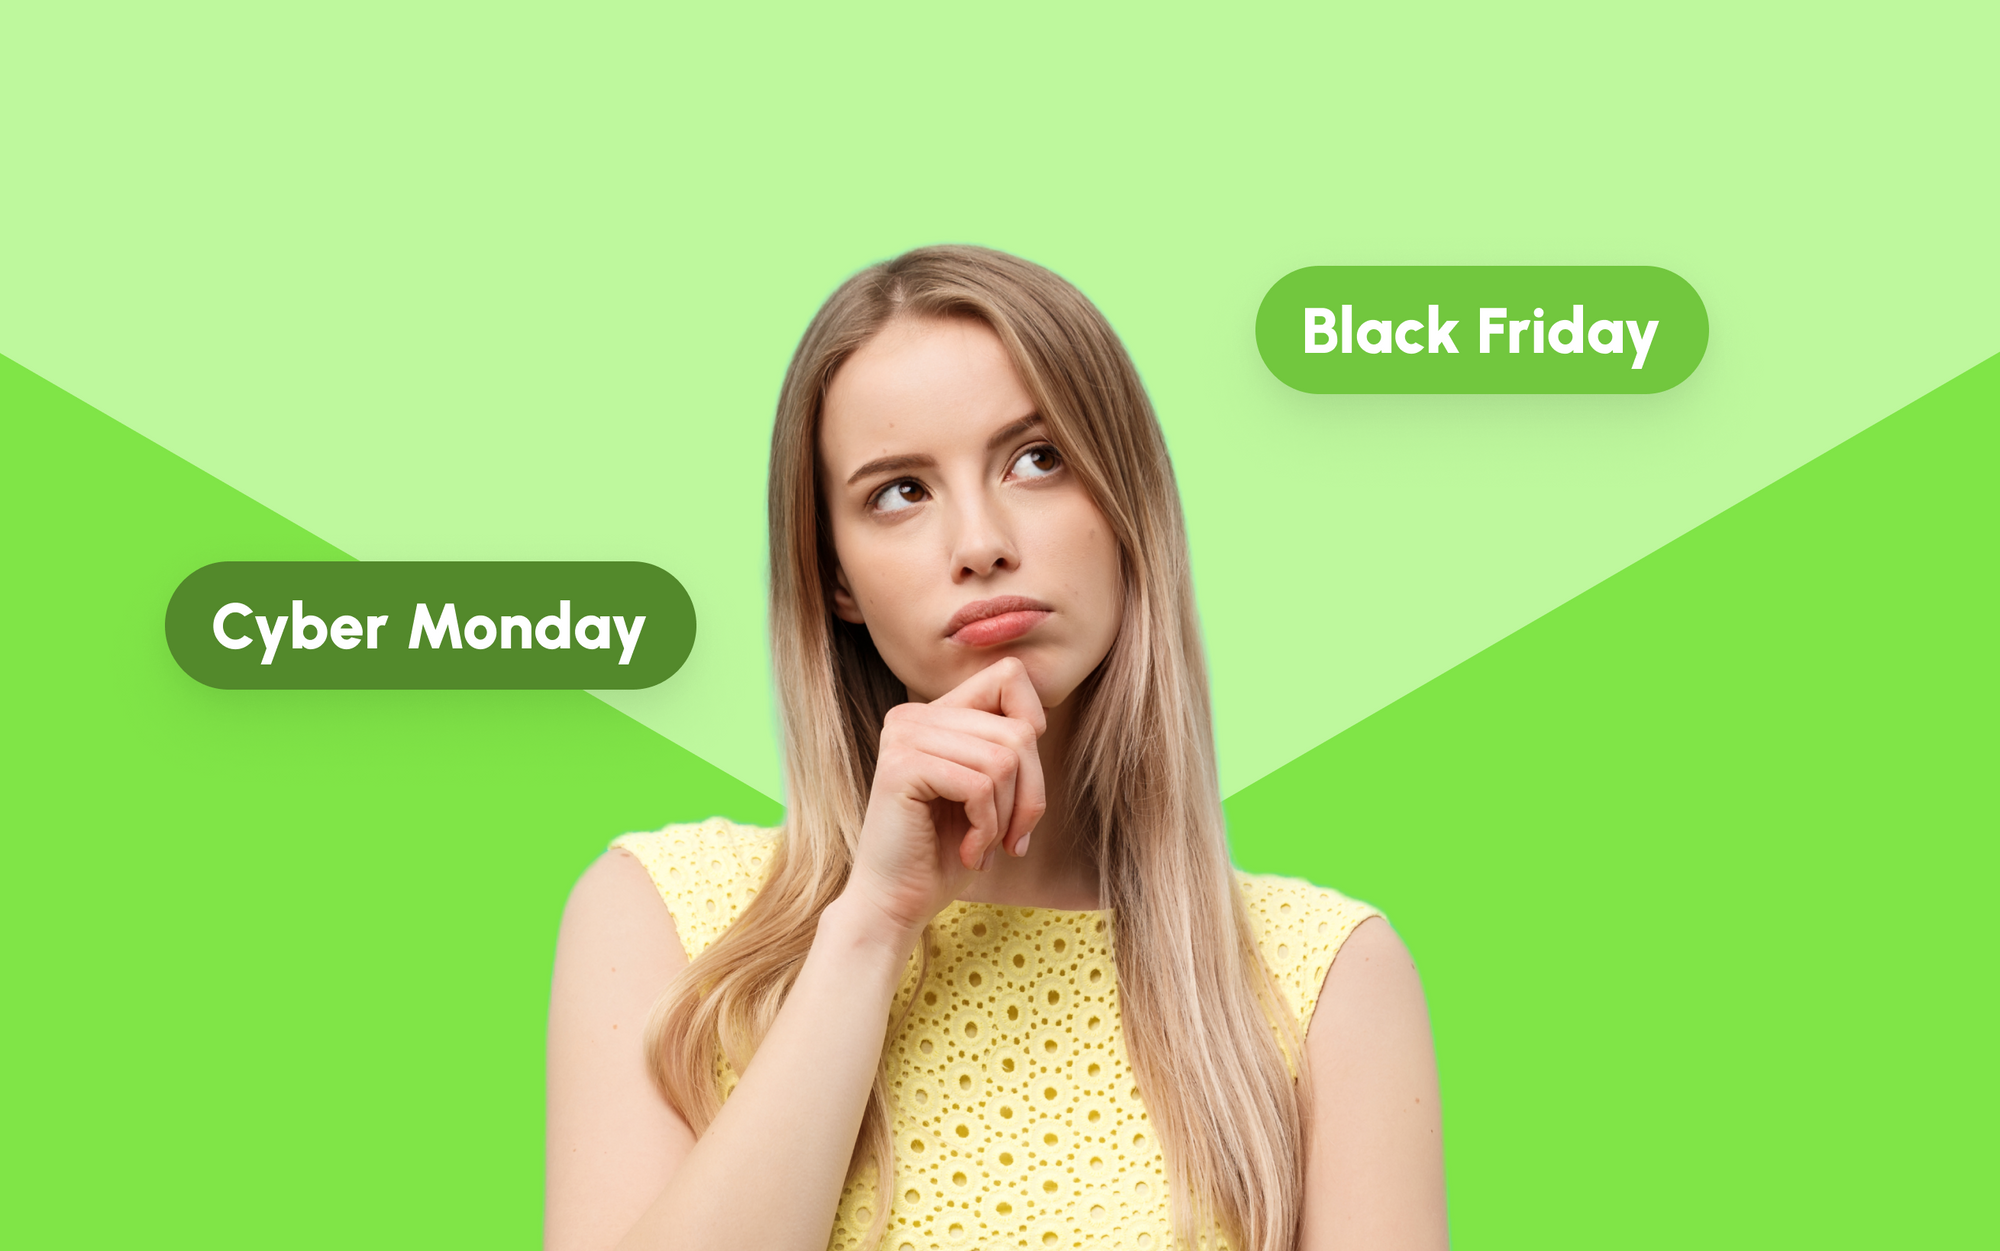 How To Counter Black Friday and Cyber Monday Bracketing?